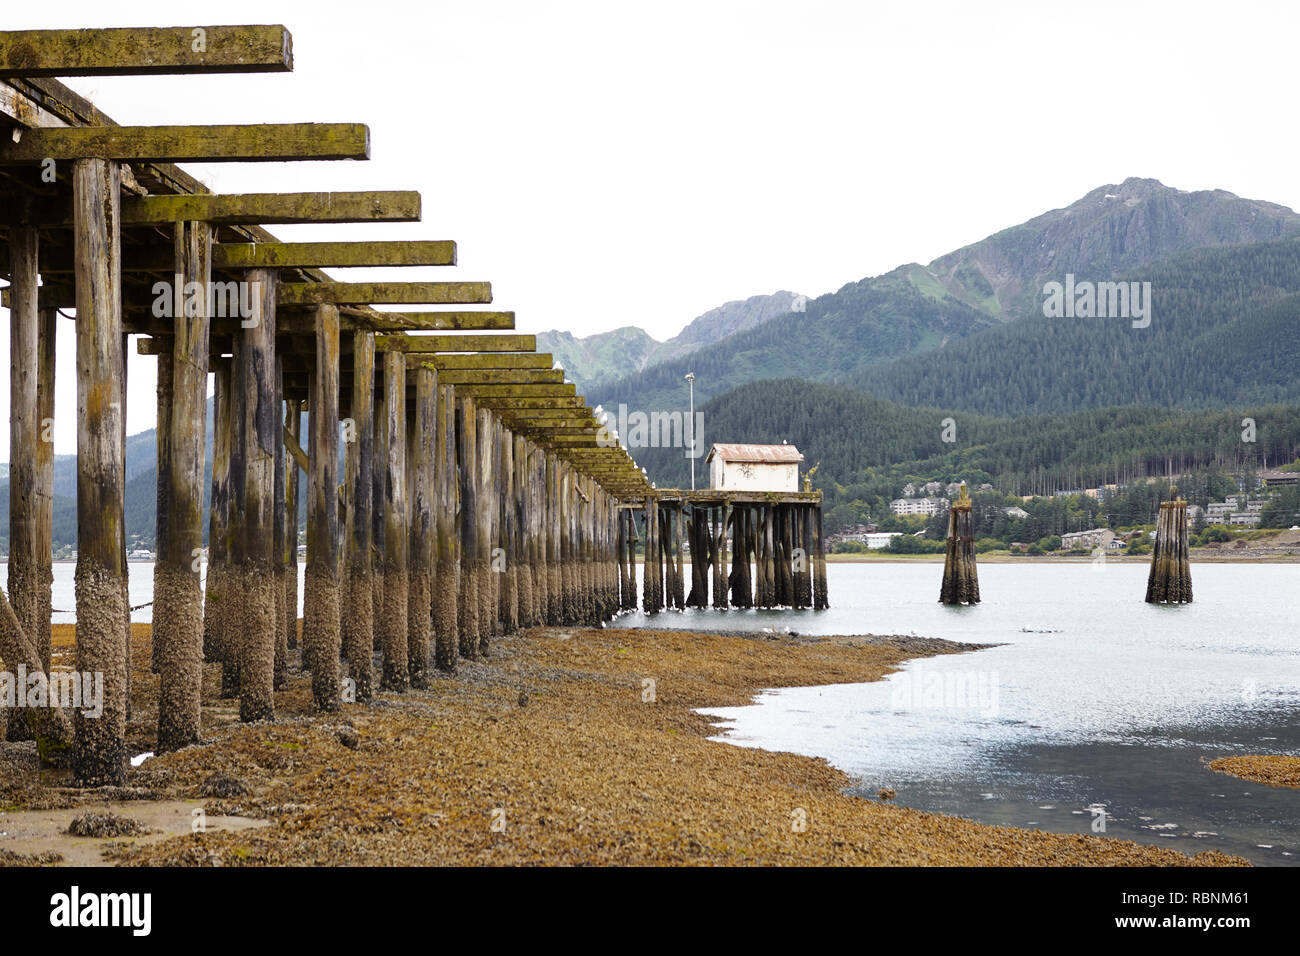 Wooden Jetty Stretching Into Lake With Forest Covered Mountains Behind In Alaska Stock Photo